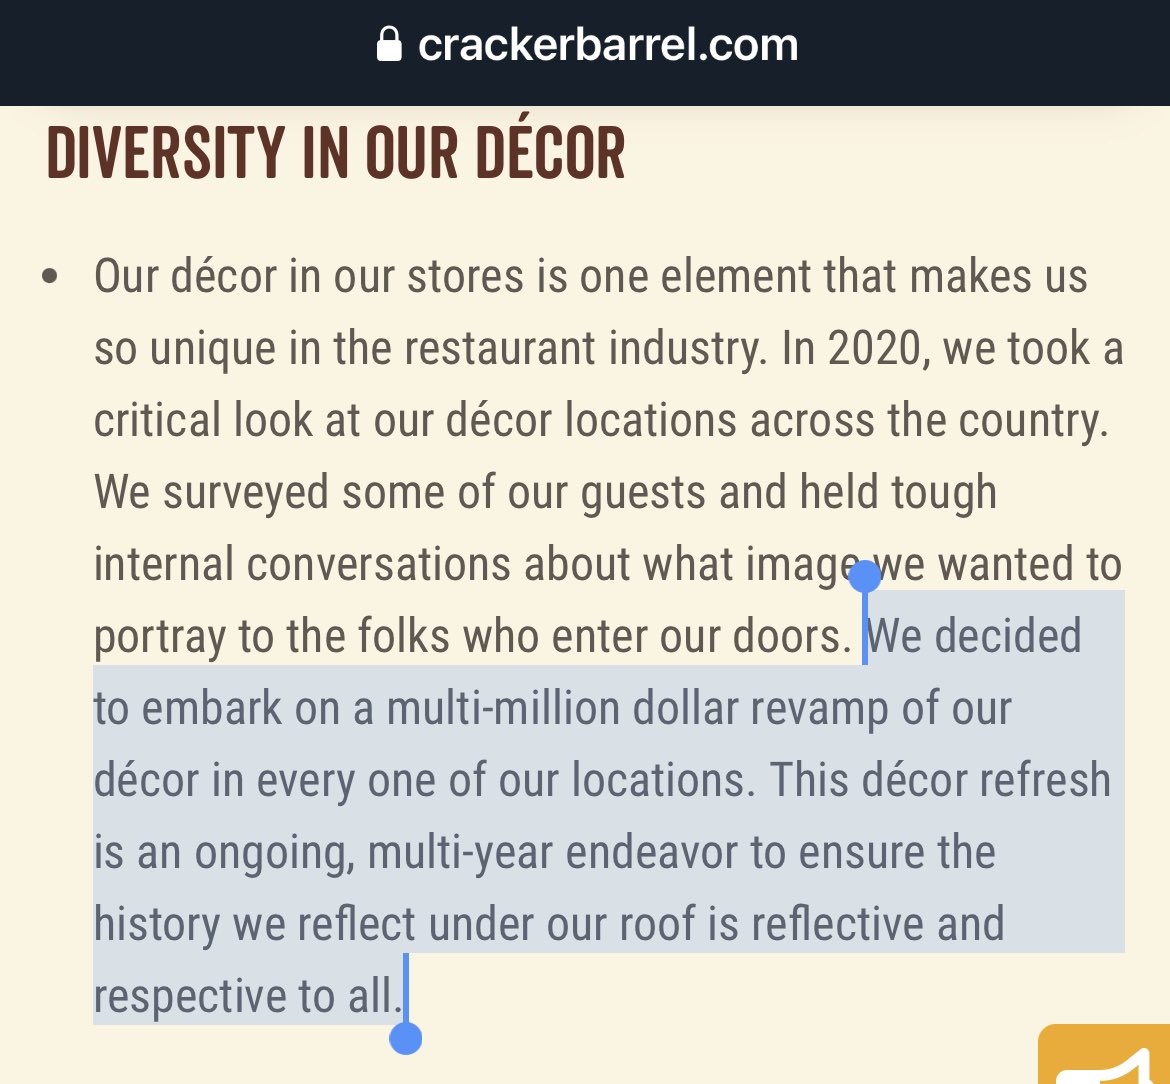 So Cracker Barrel spent millions of dollars revamping their famour decor to be more inclusive to groomers and pedos, as part of their “Diversity in our Décor” program. See this, from their website 👇